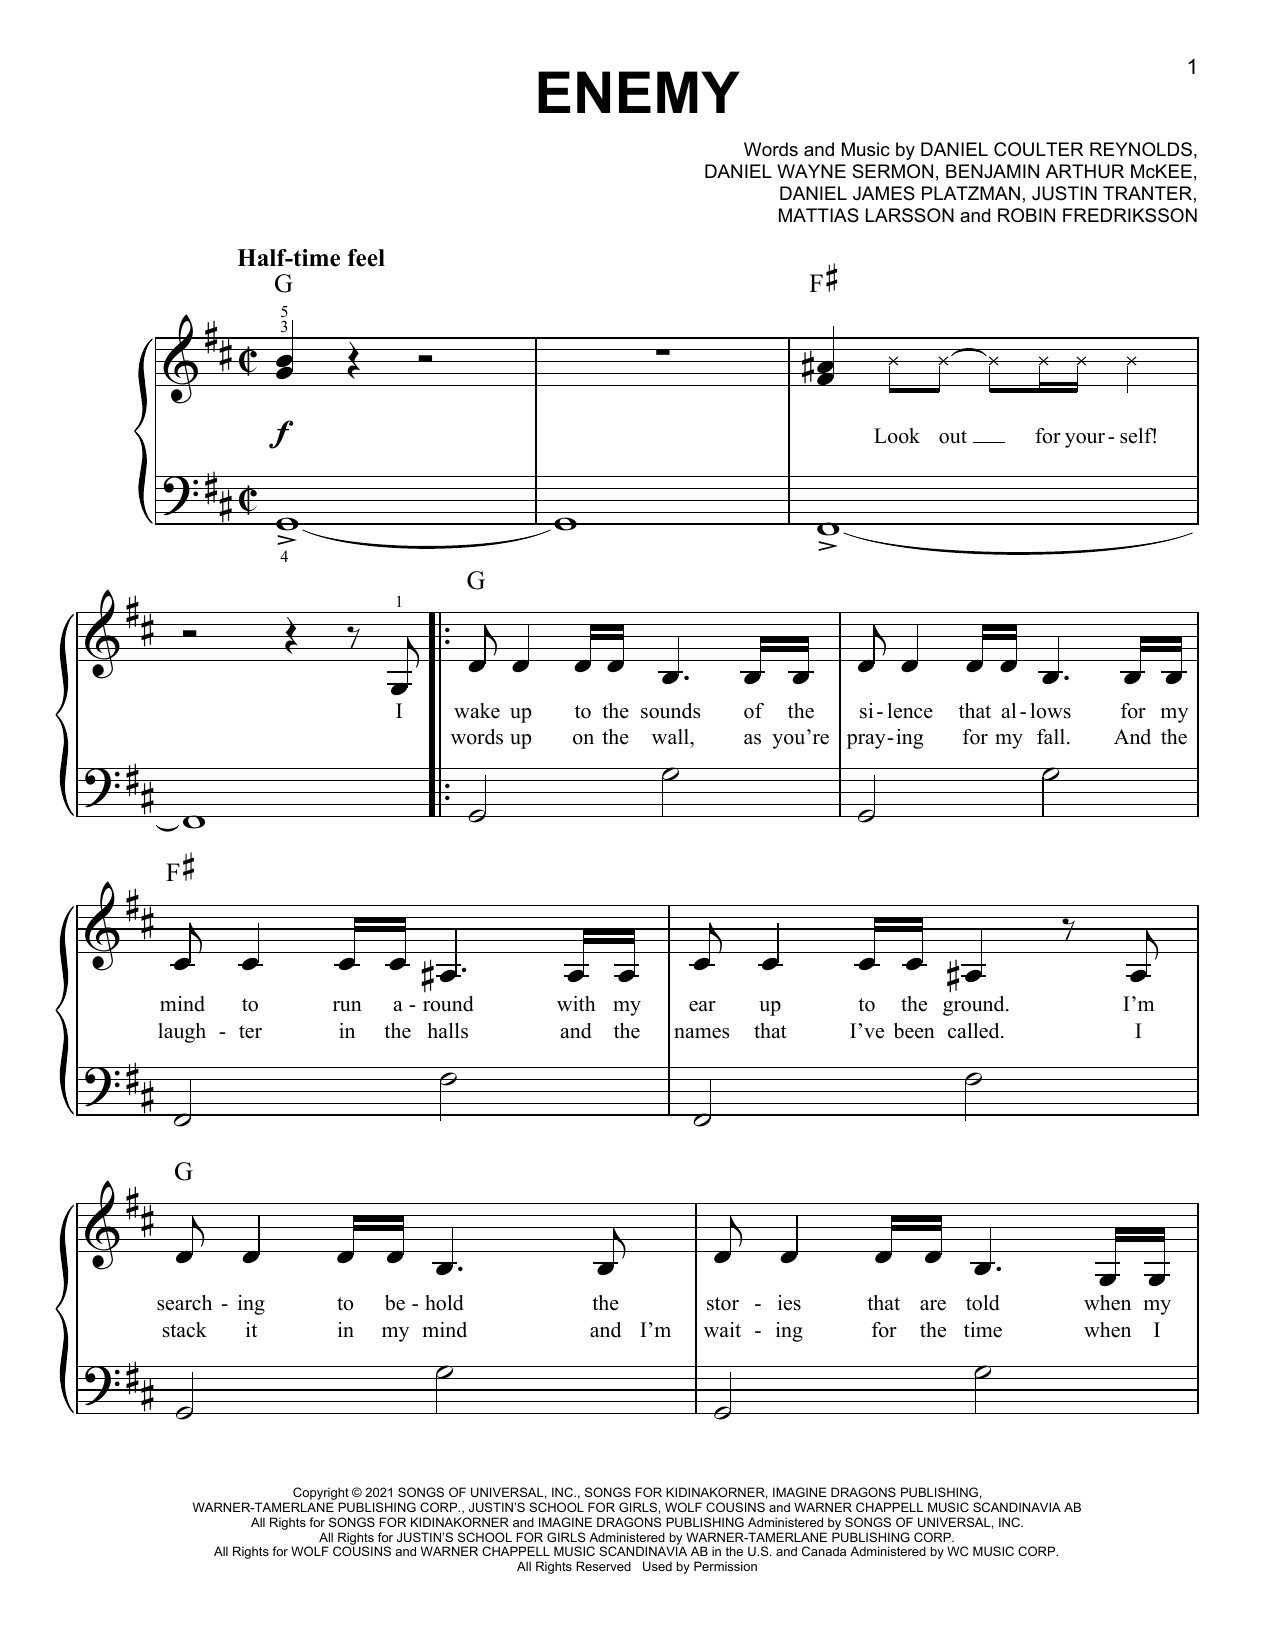 Download Imagine Dragons X JID Enemy (from the series Arcane League of Sheet Music